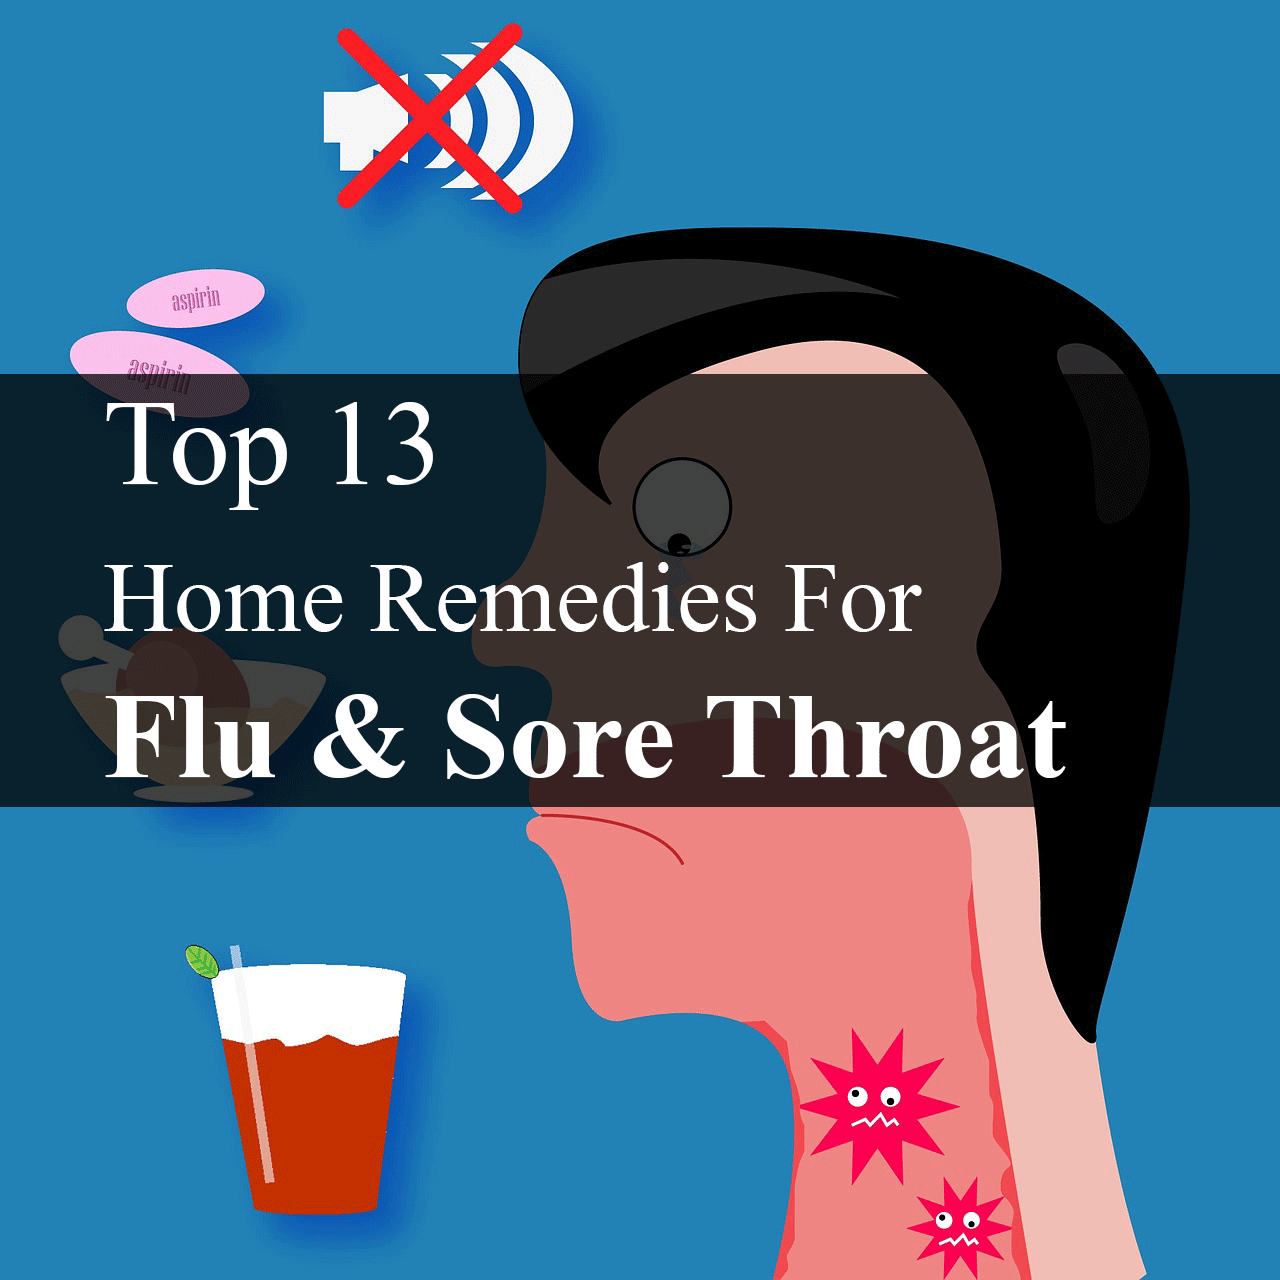 Top 13 home remedies for flu and sore throat